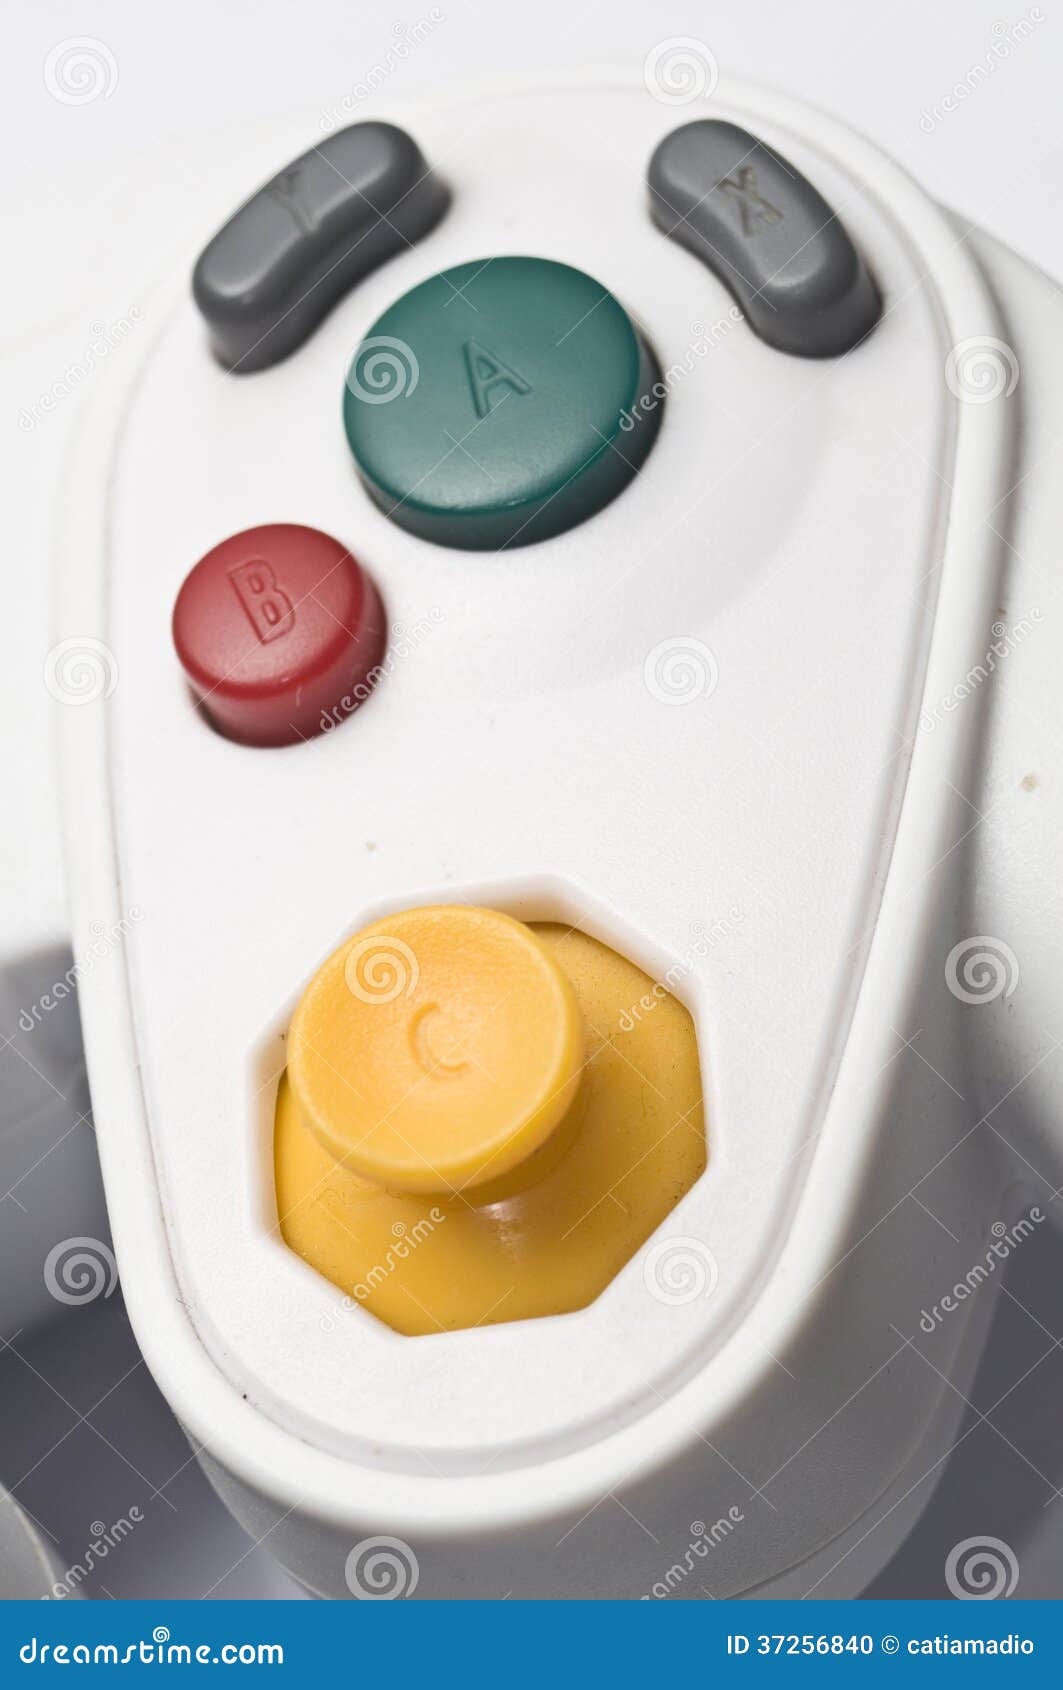 white gamepad buttons